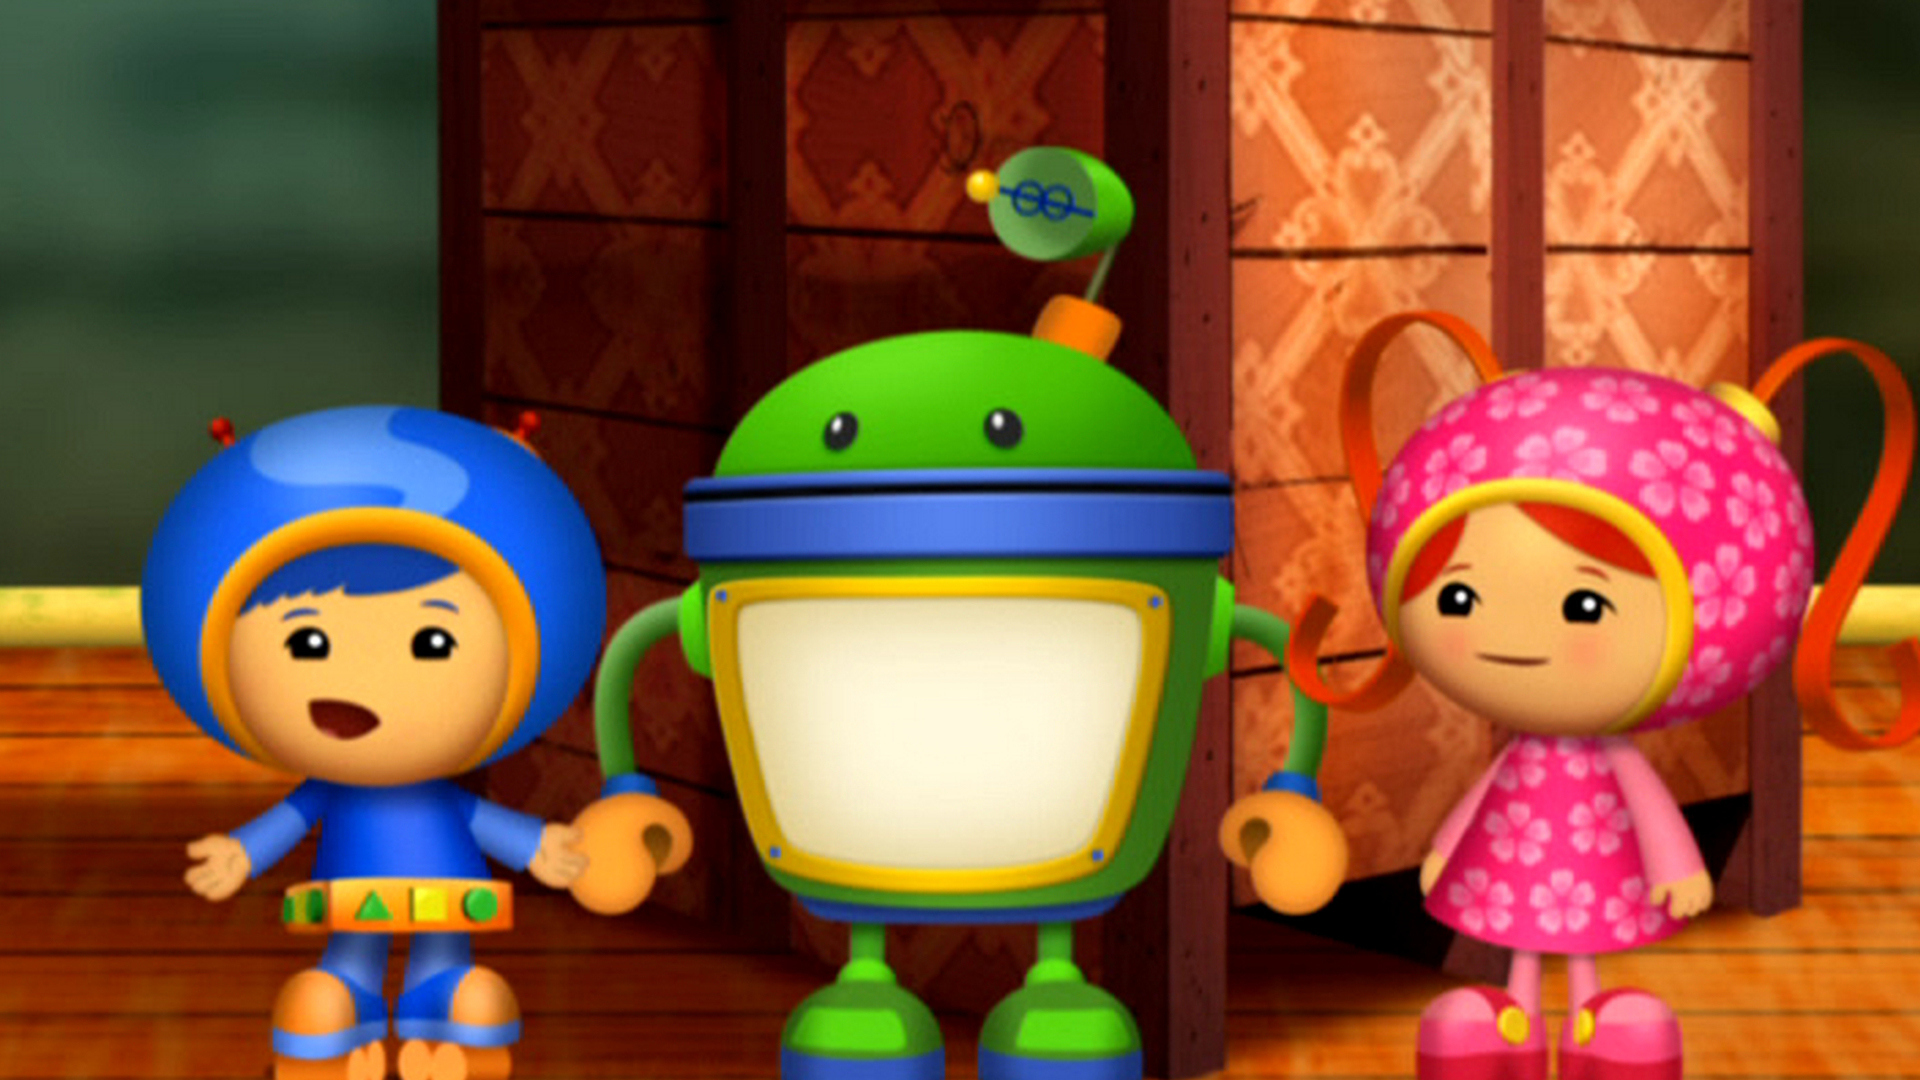 watch-team-umizoomi-season-2-episode-14-chicks-in-the-city-full-show